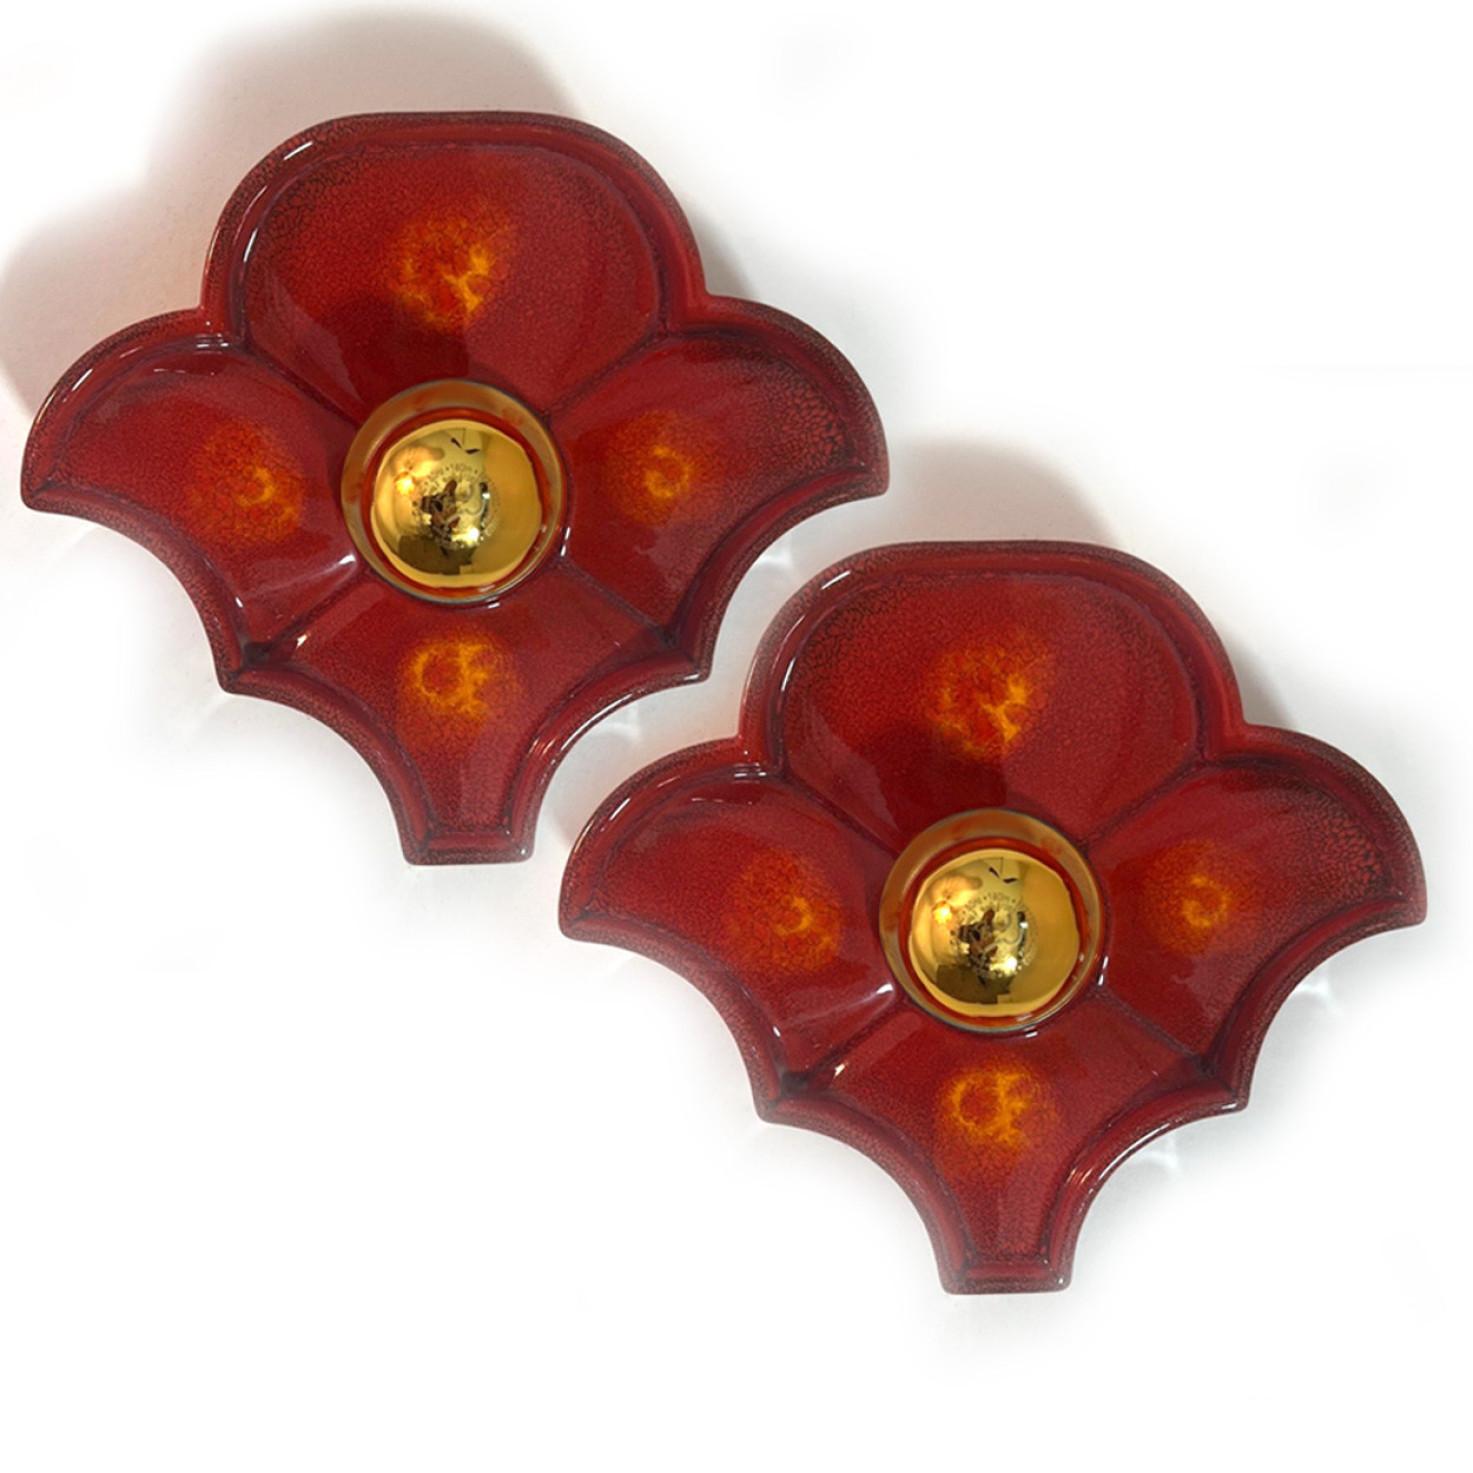 Several Flower Red Ceramic Wall Lights by Hustadt Keramik, Germany, 1970 For Sale 5